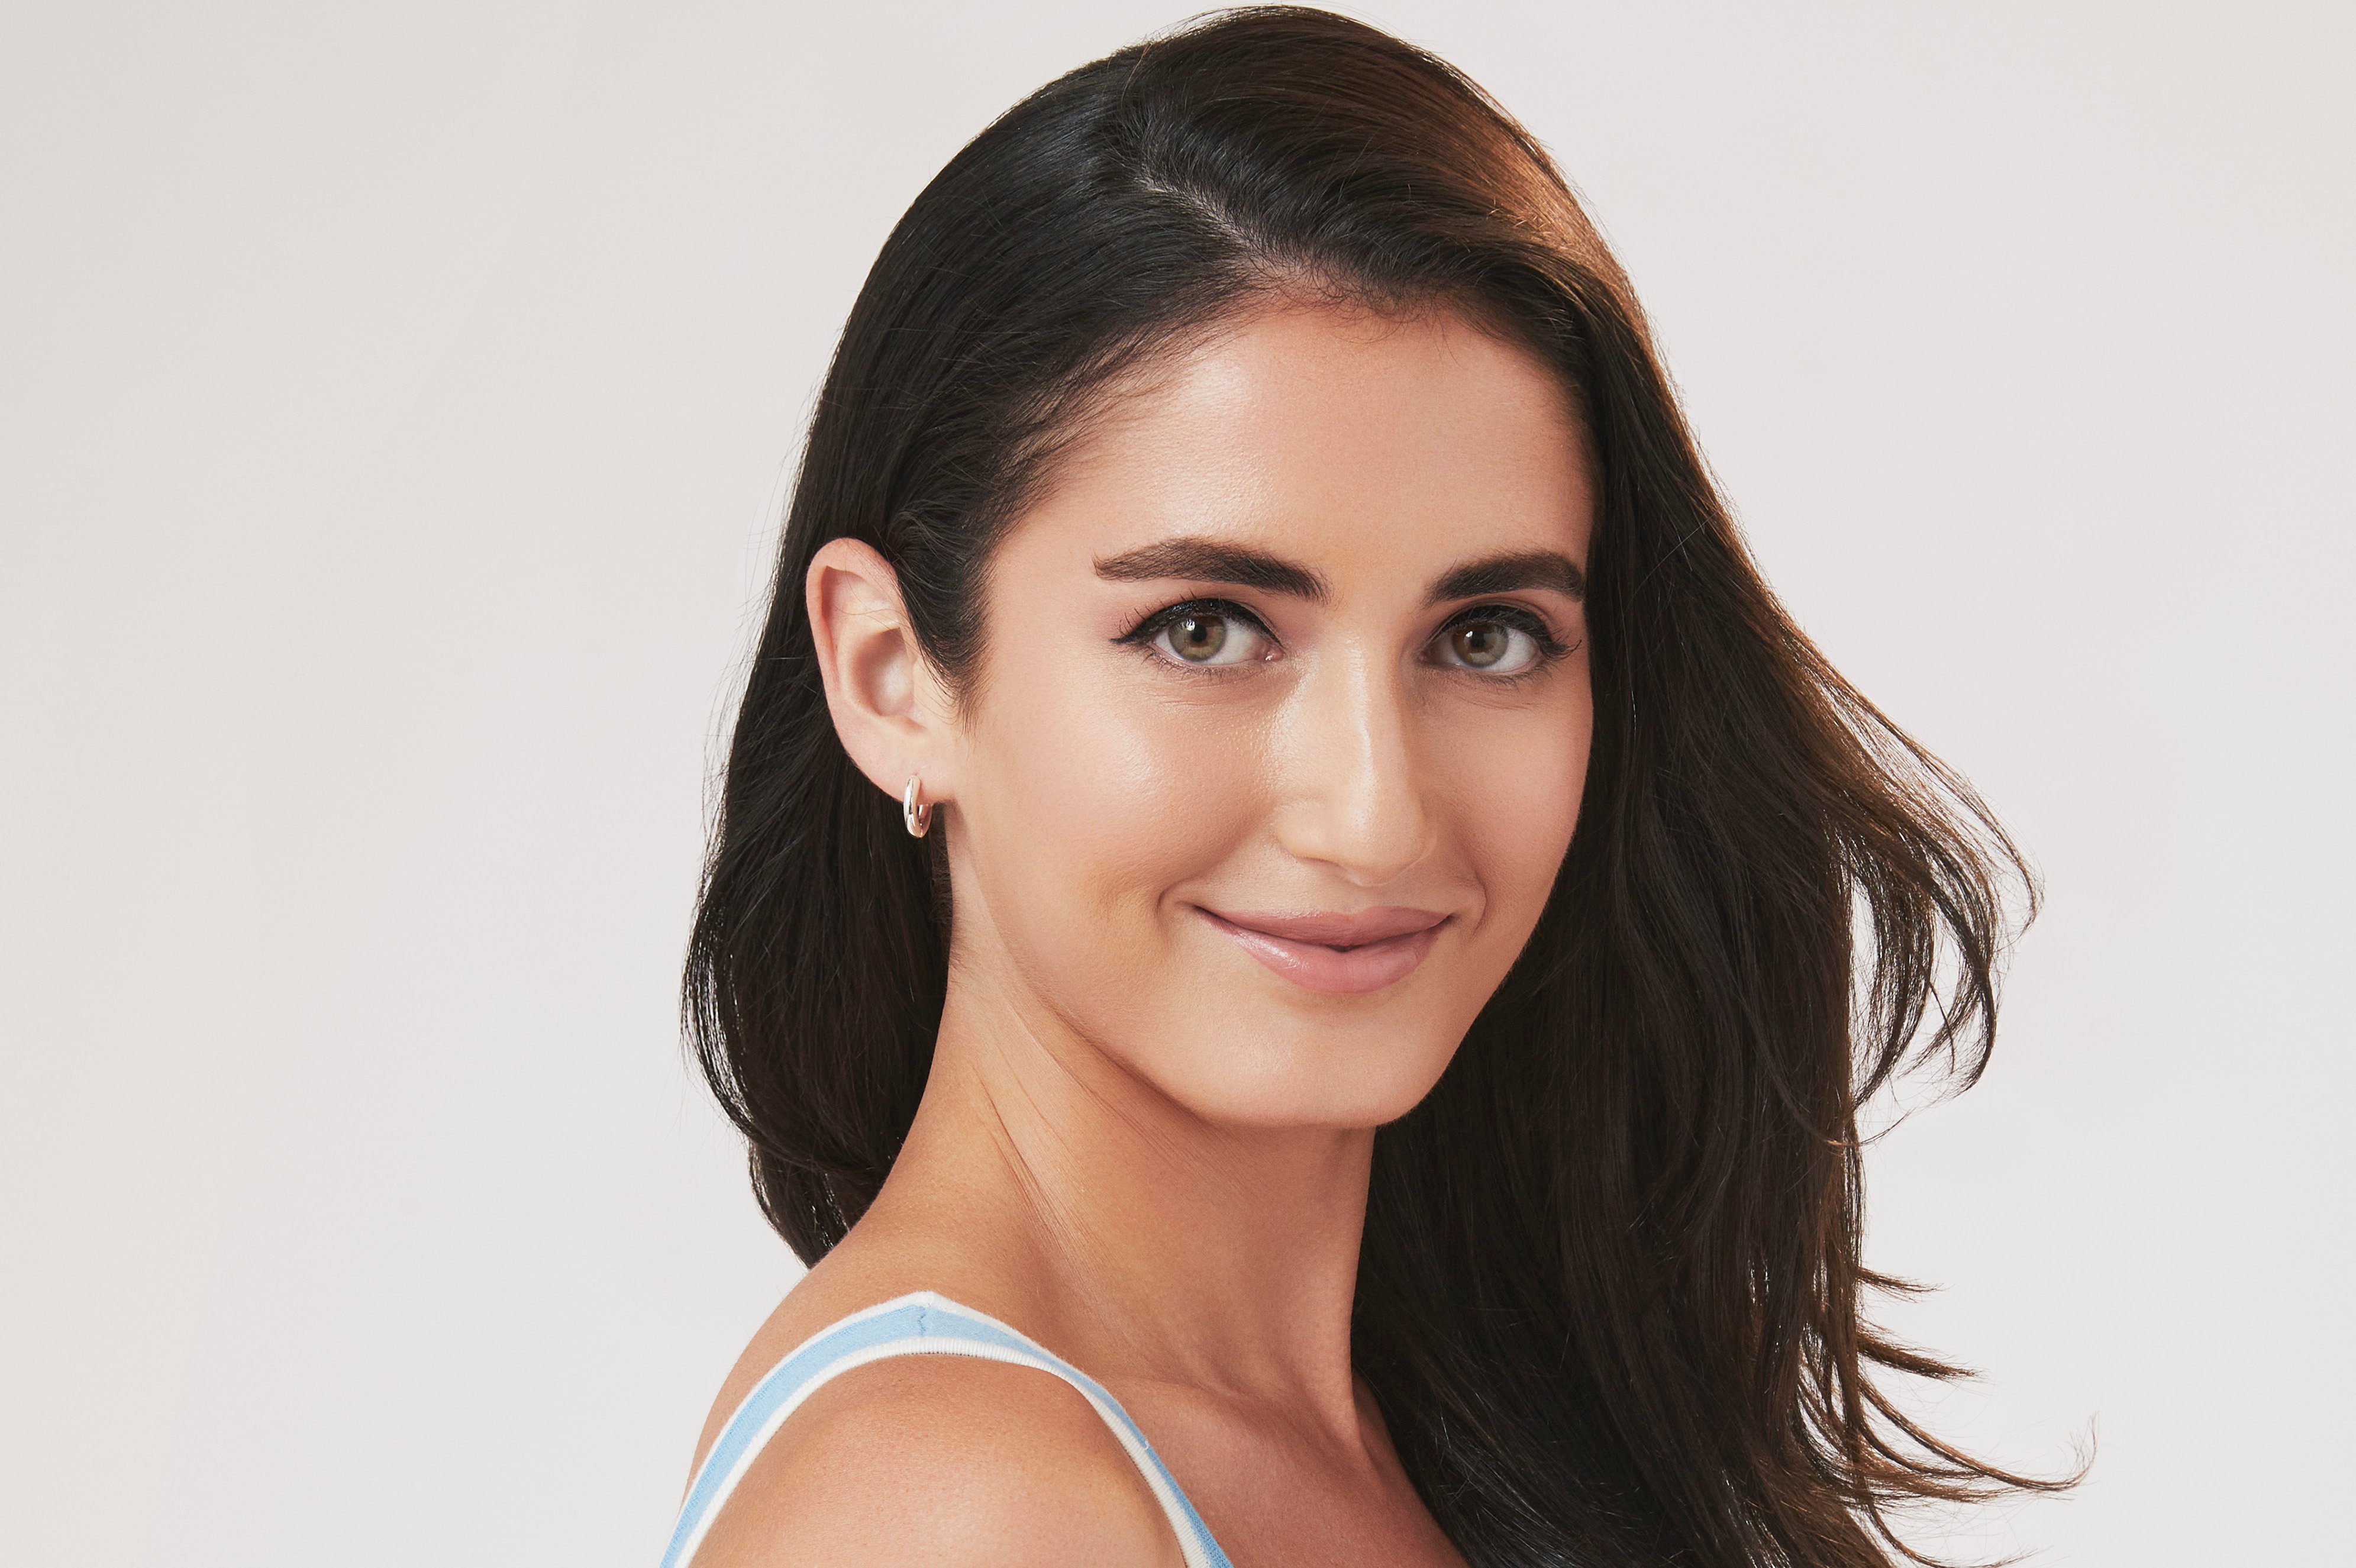 'The Bachelor' star Ariel Frenkel in her official headshot for the show.